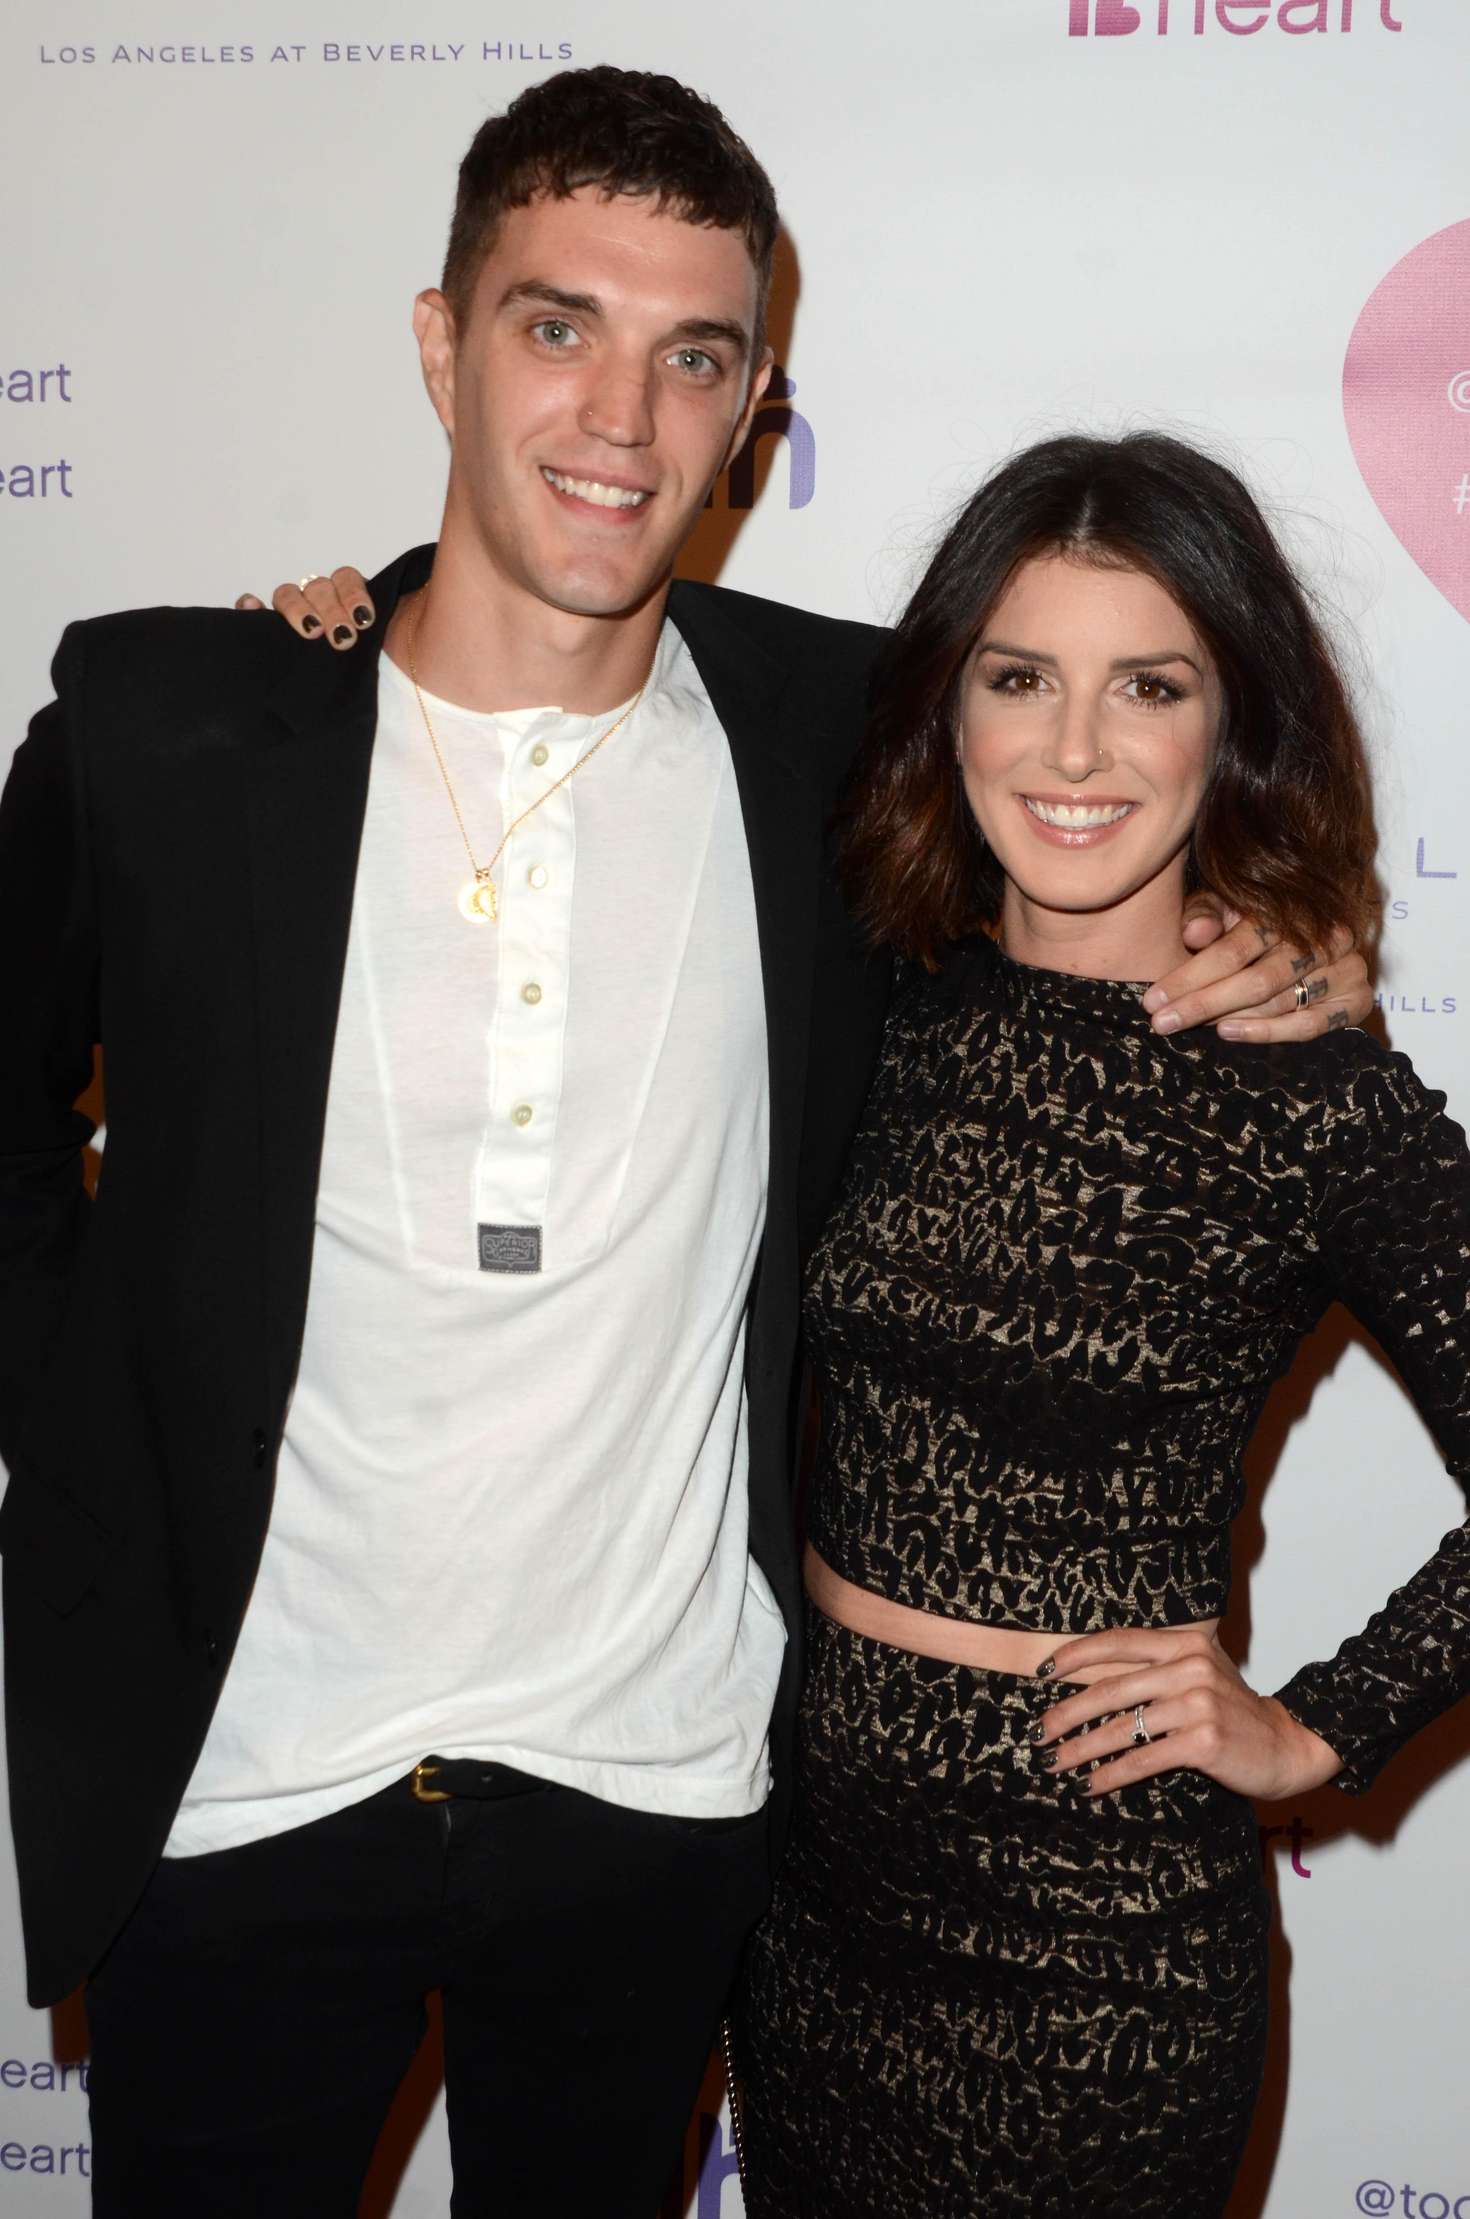 Shenae Grimes together 1 heart Launch Party 07